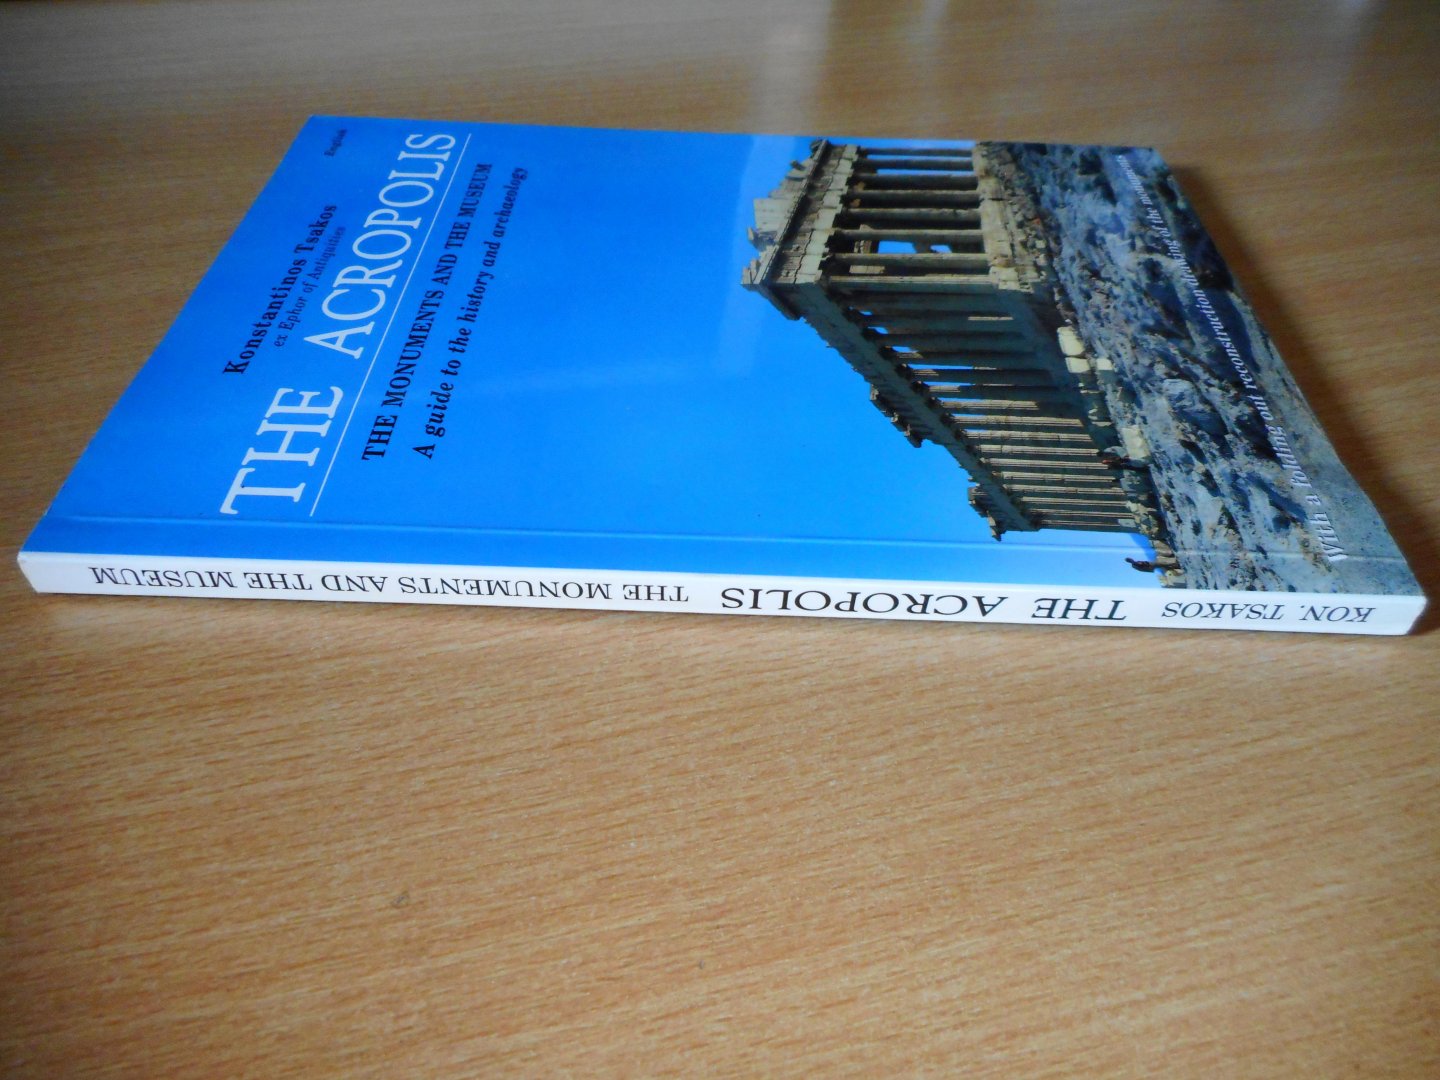 Tsakos, Konstantinos - The Acropolis. The monuments and the museum. A guide to the history and archaeology.